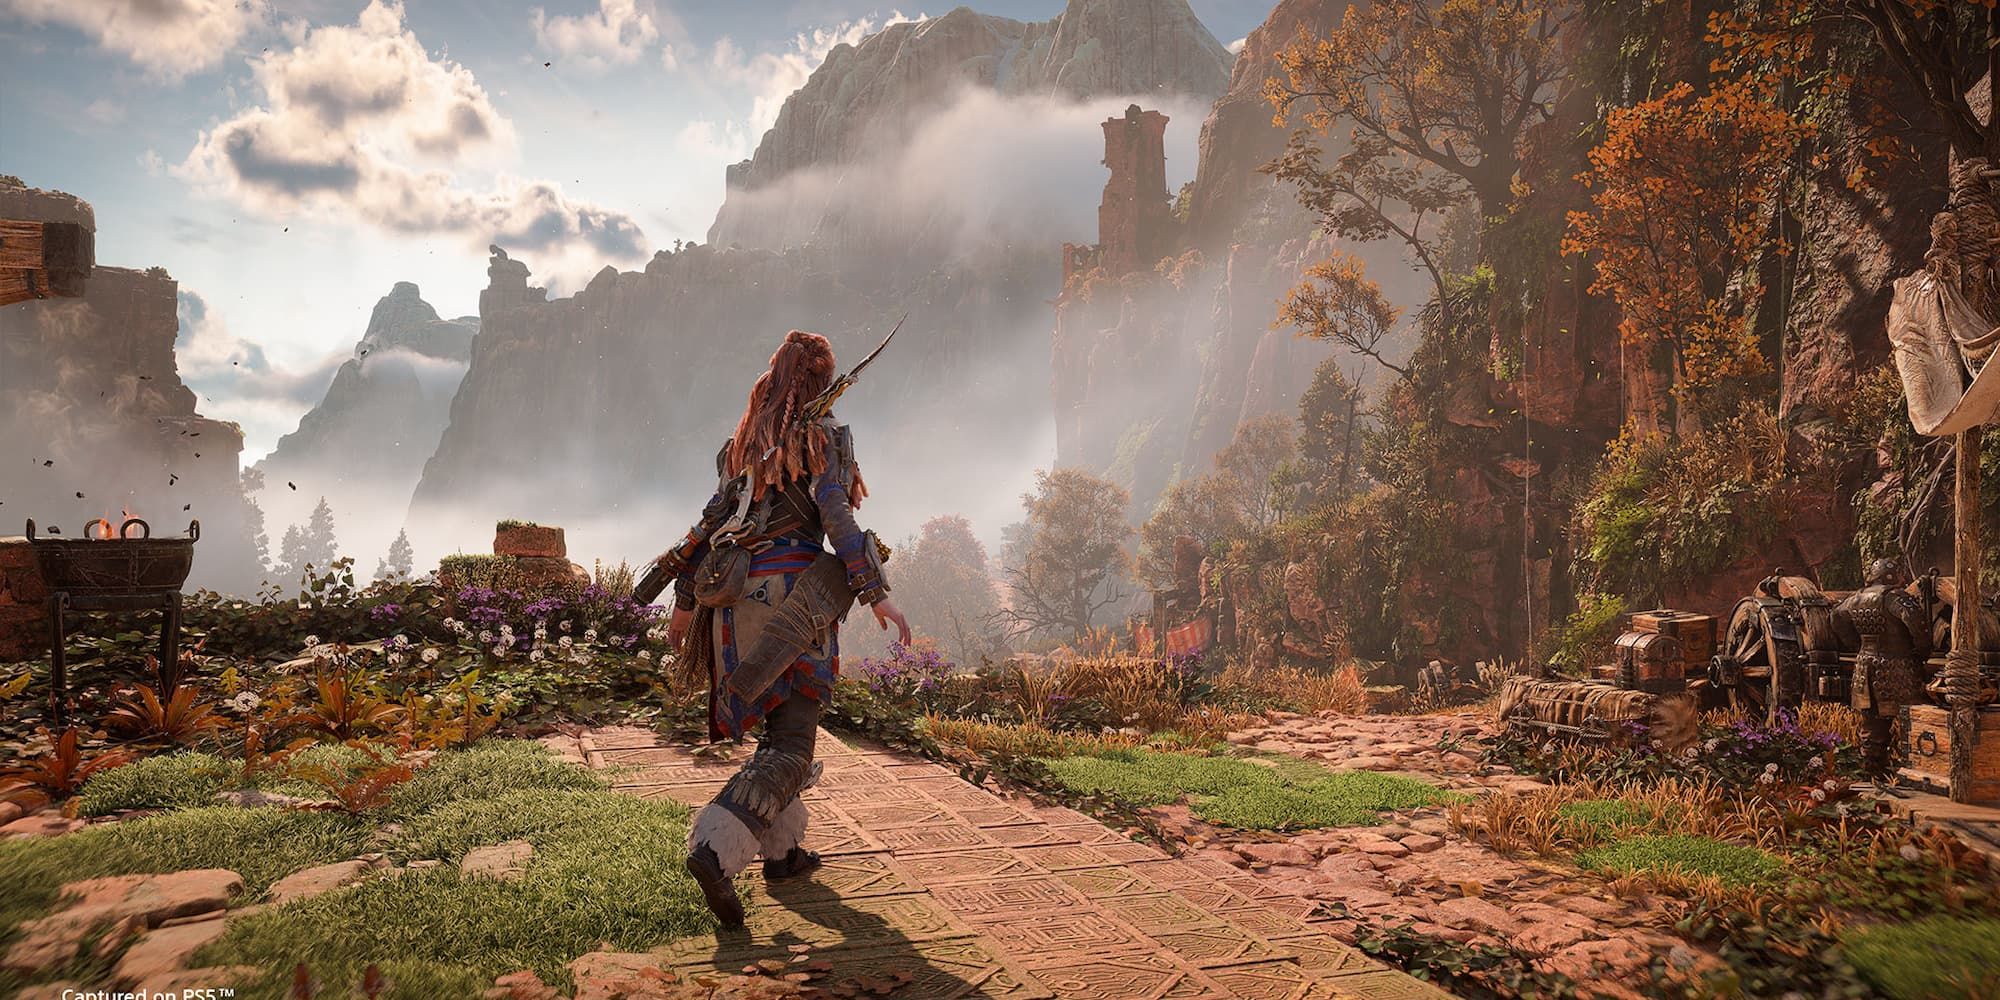 Aloy walks along a path that leads to the woods in Horizon Forbidden West.